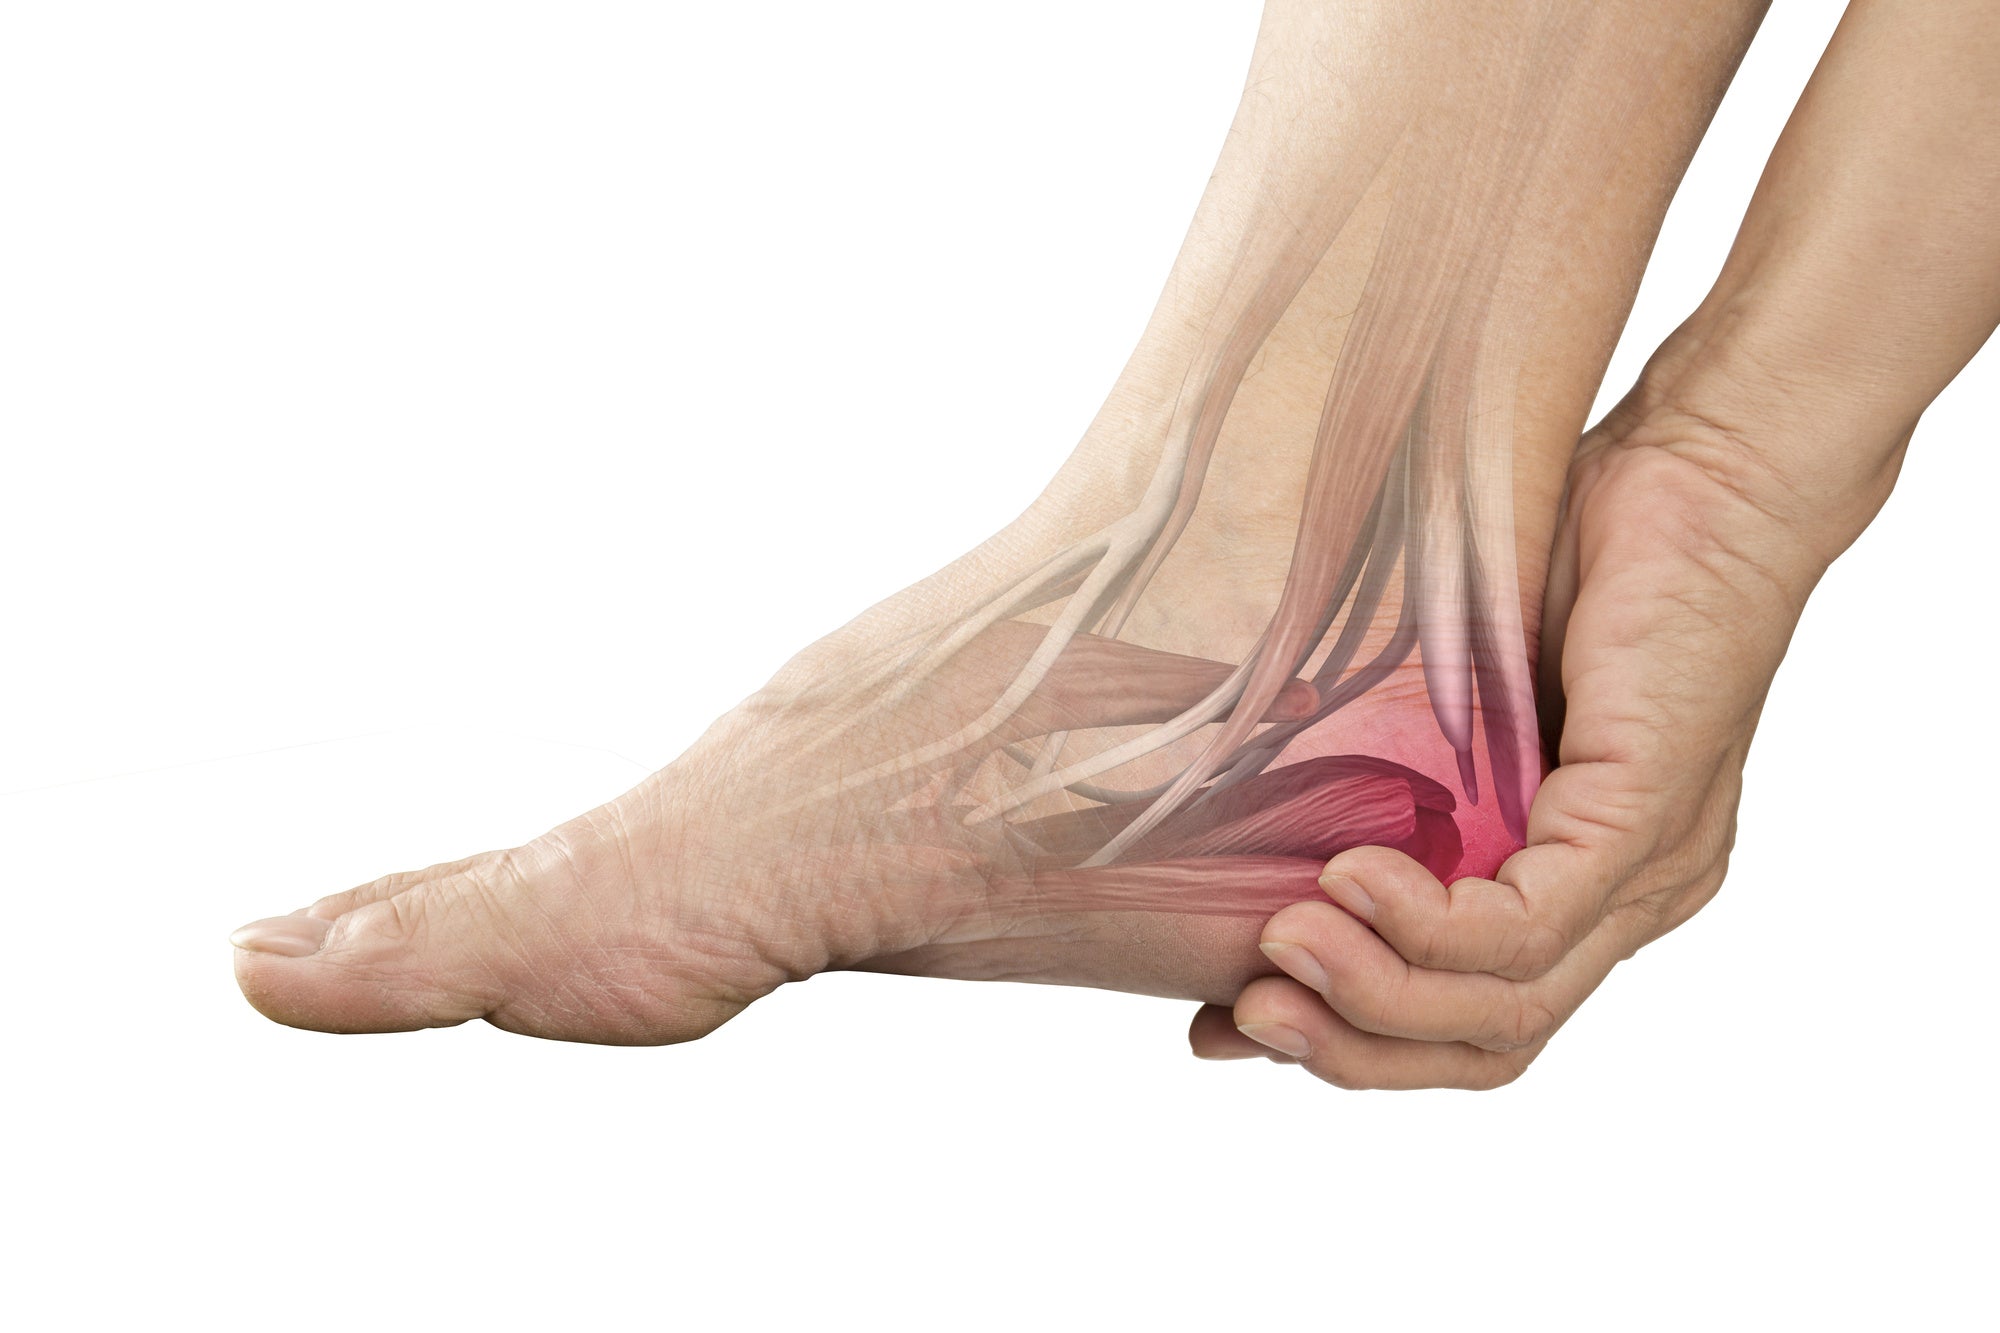 Understanding Morton's Neuroma and Finding Relief